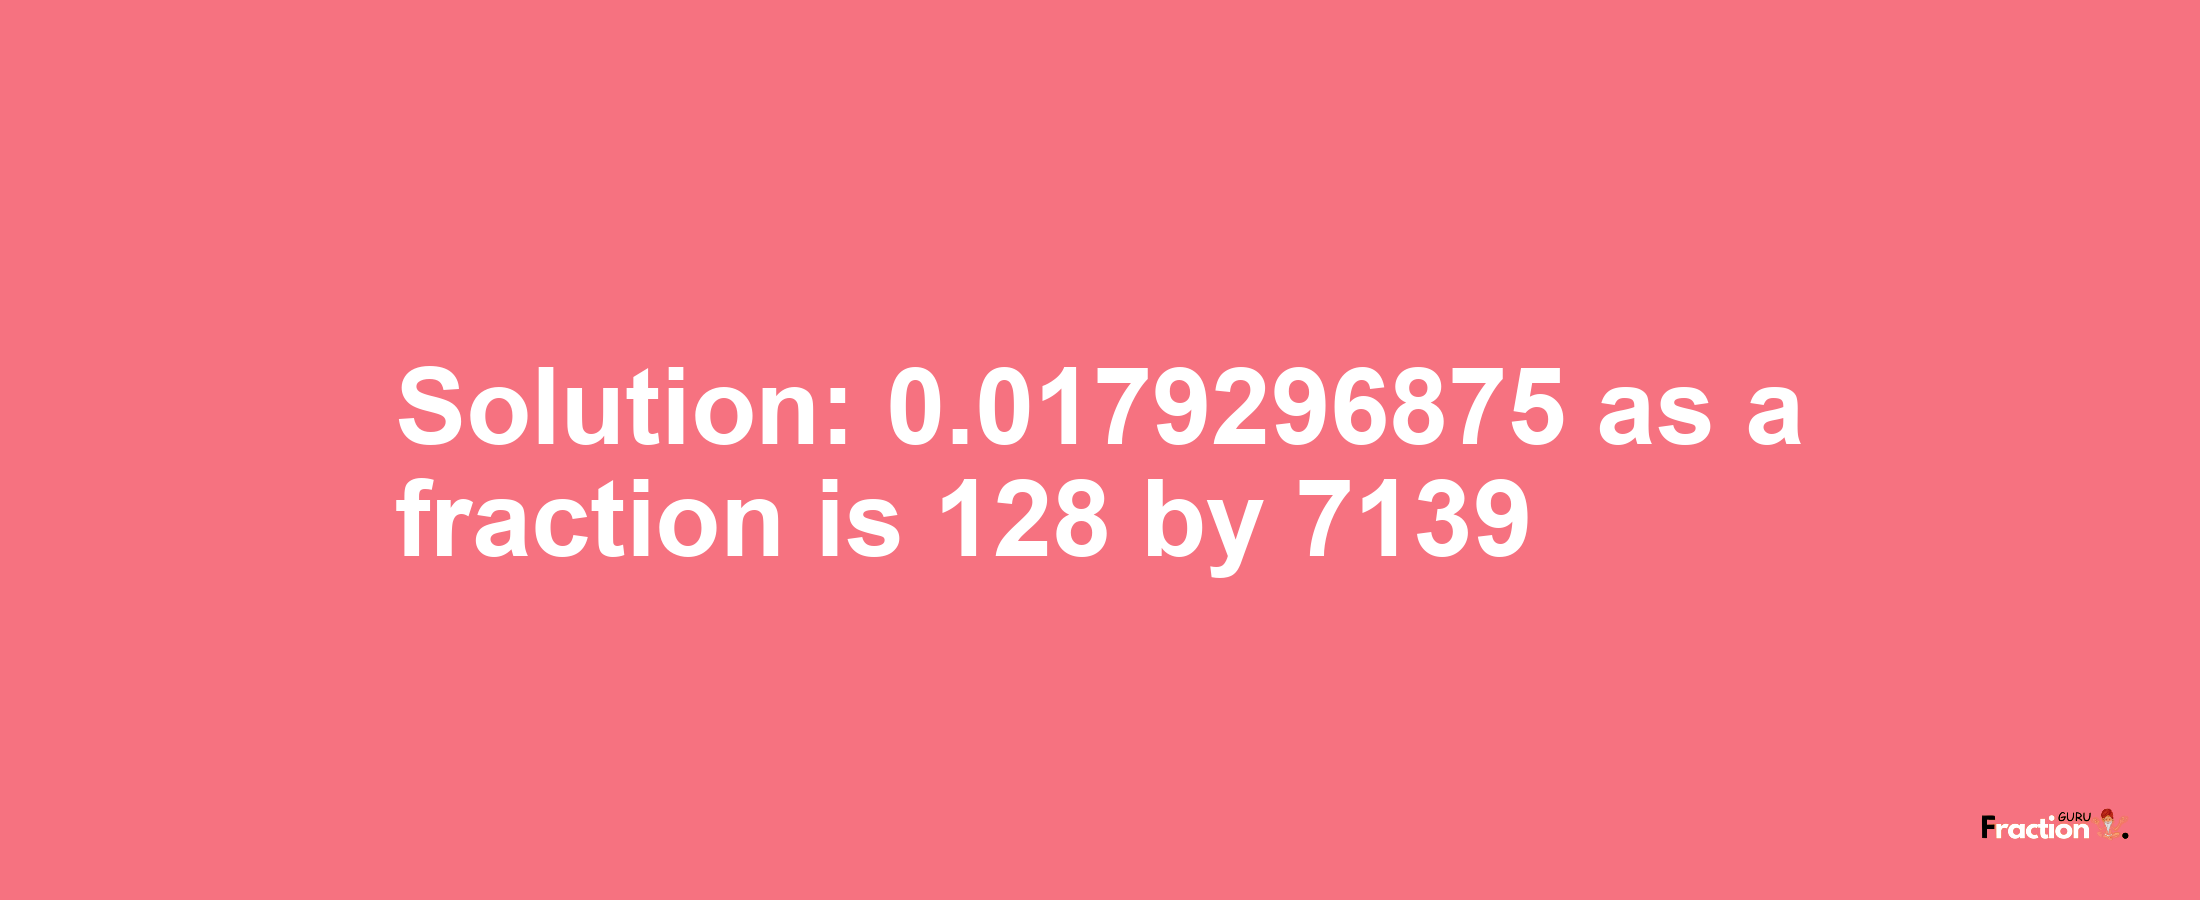 Solution:0.0179296875 as a fraction is 128/7139